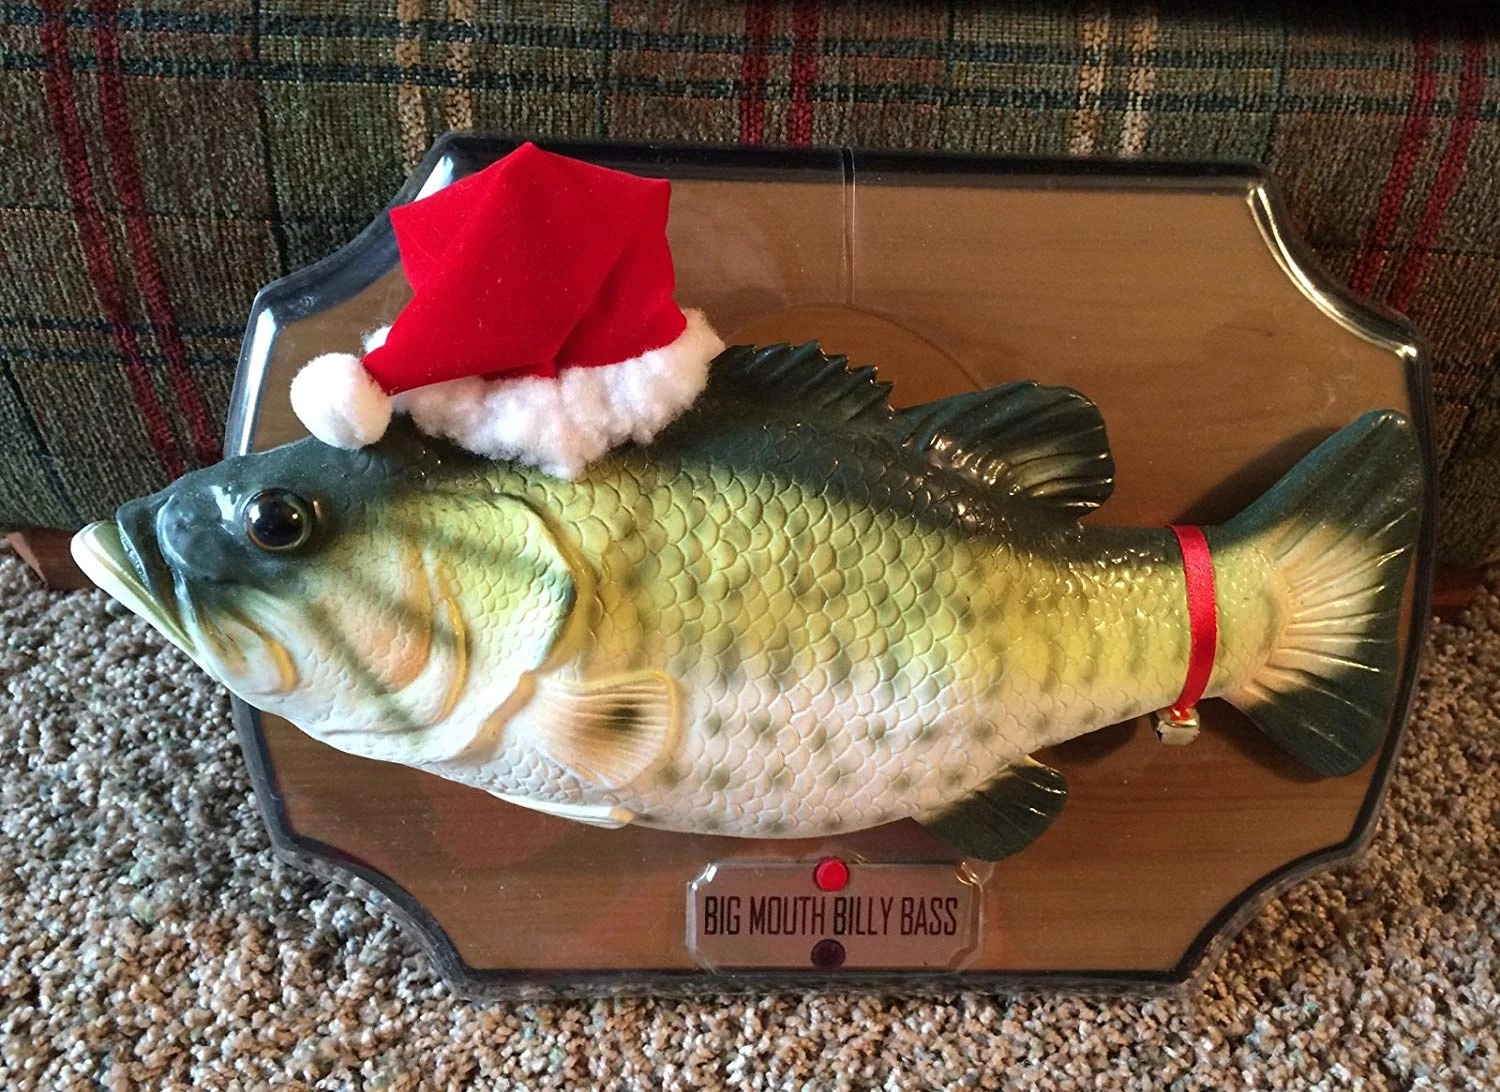 You Can Now Get An  Alexa 'Big Mouth Billy Bass' [VIDEO]